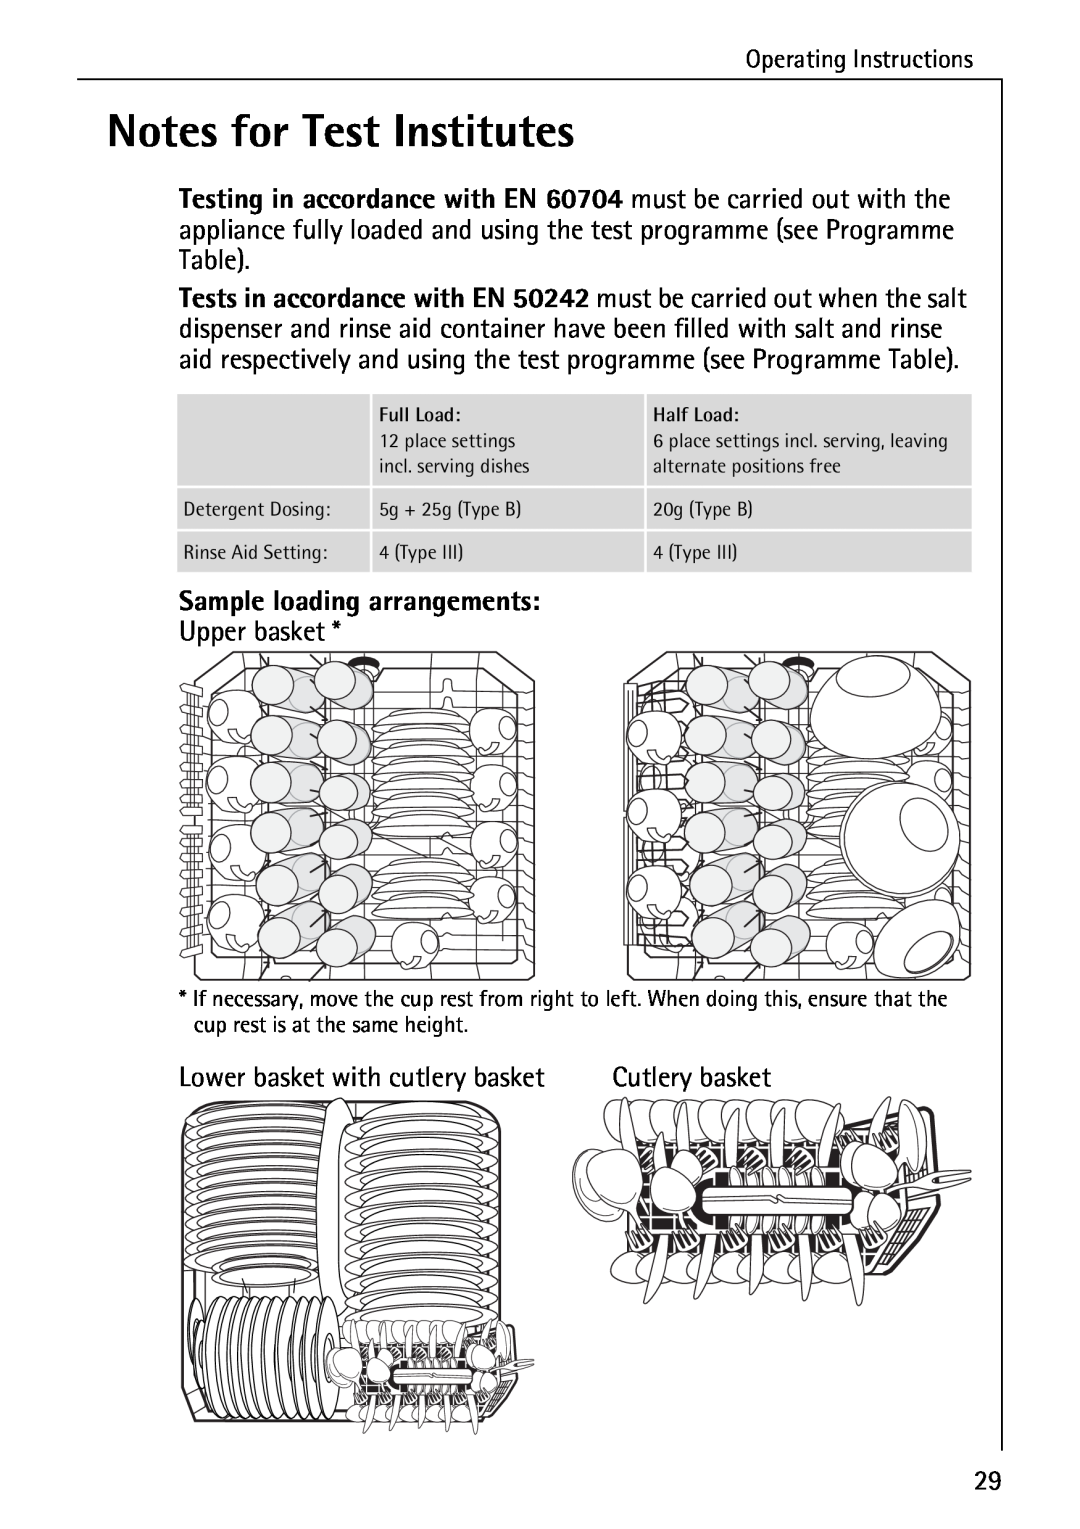 AEG 40260 I Notes for Test Institutes, Sample loading arrangements, Cutlery basket, place settings incl. serving, leaving 